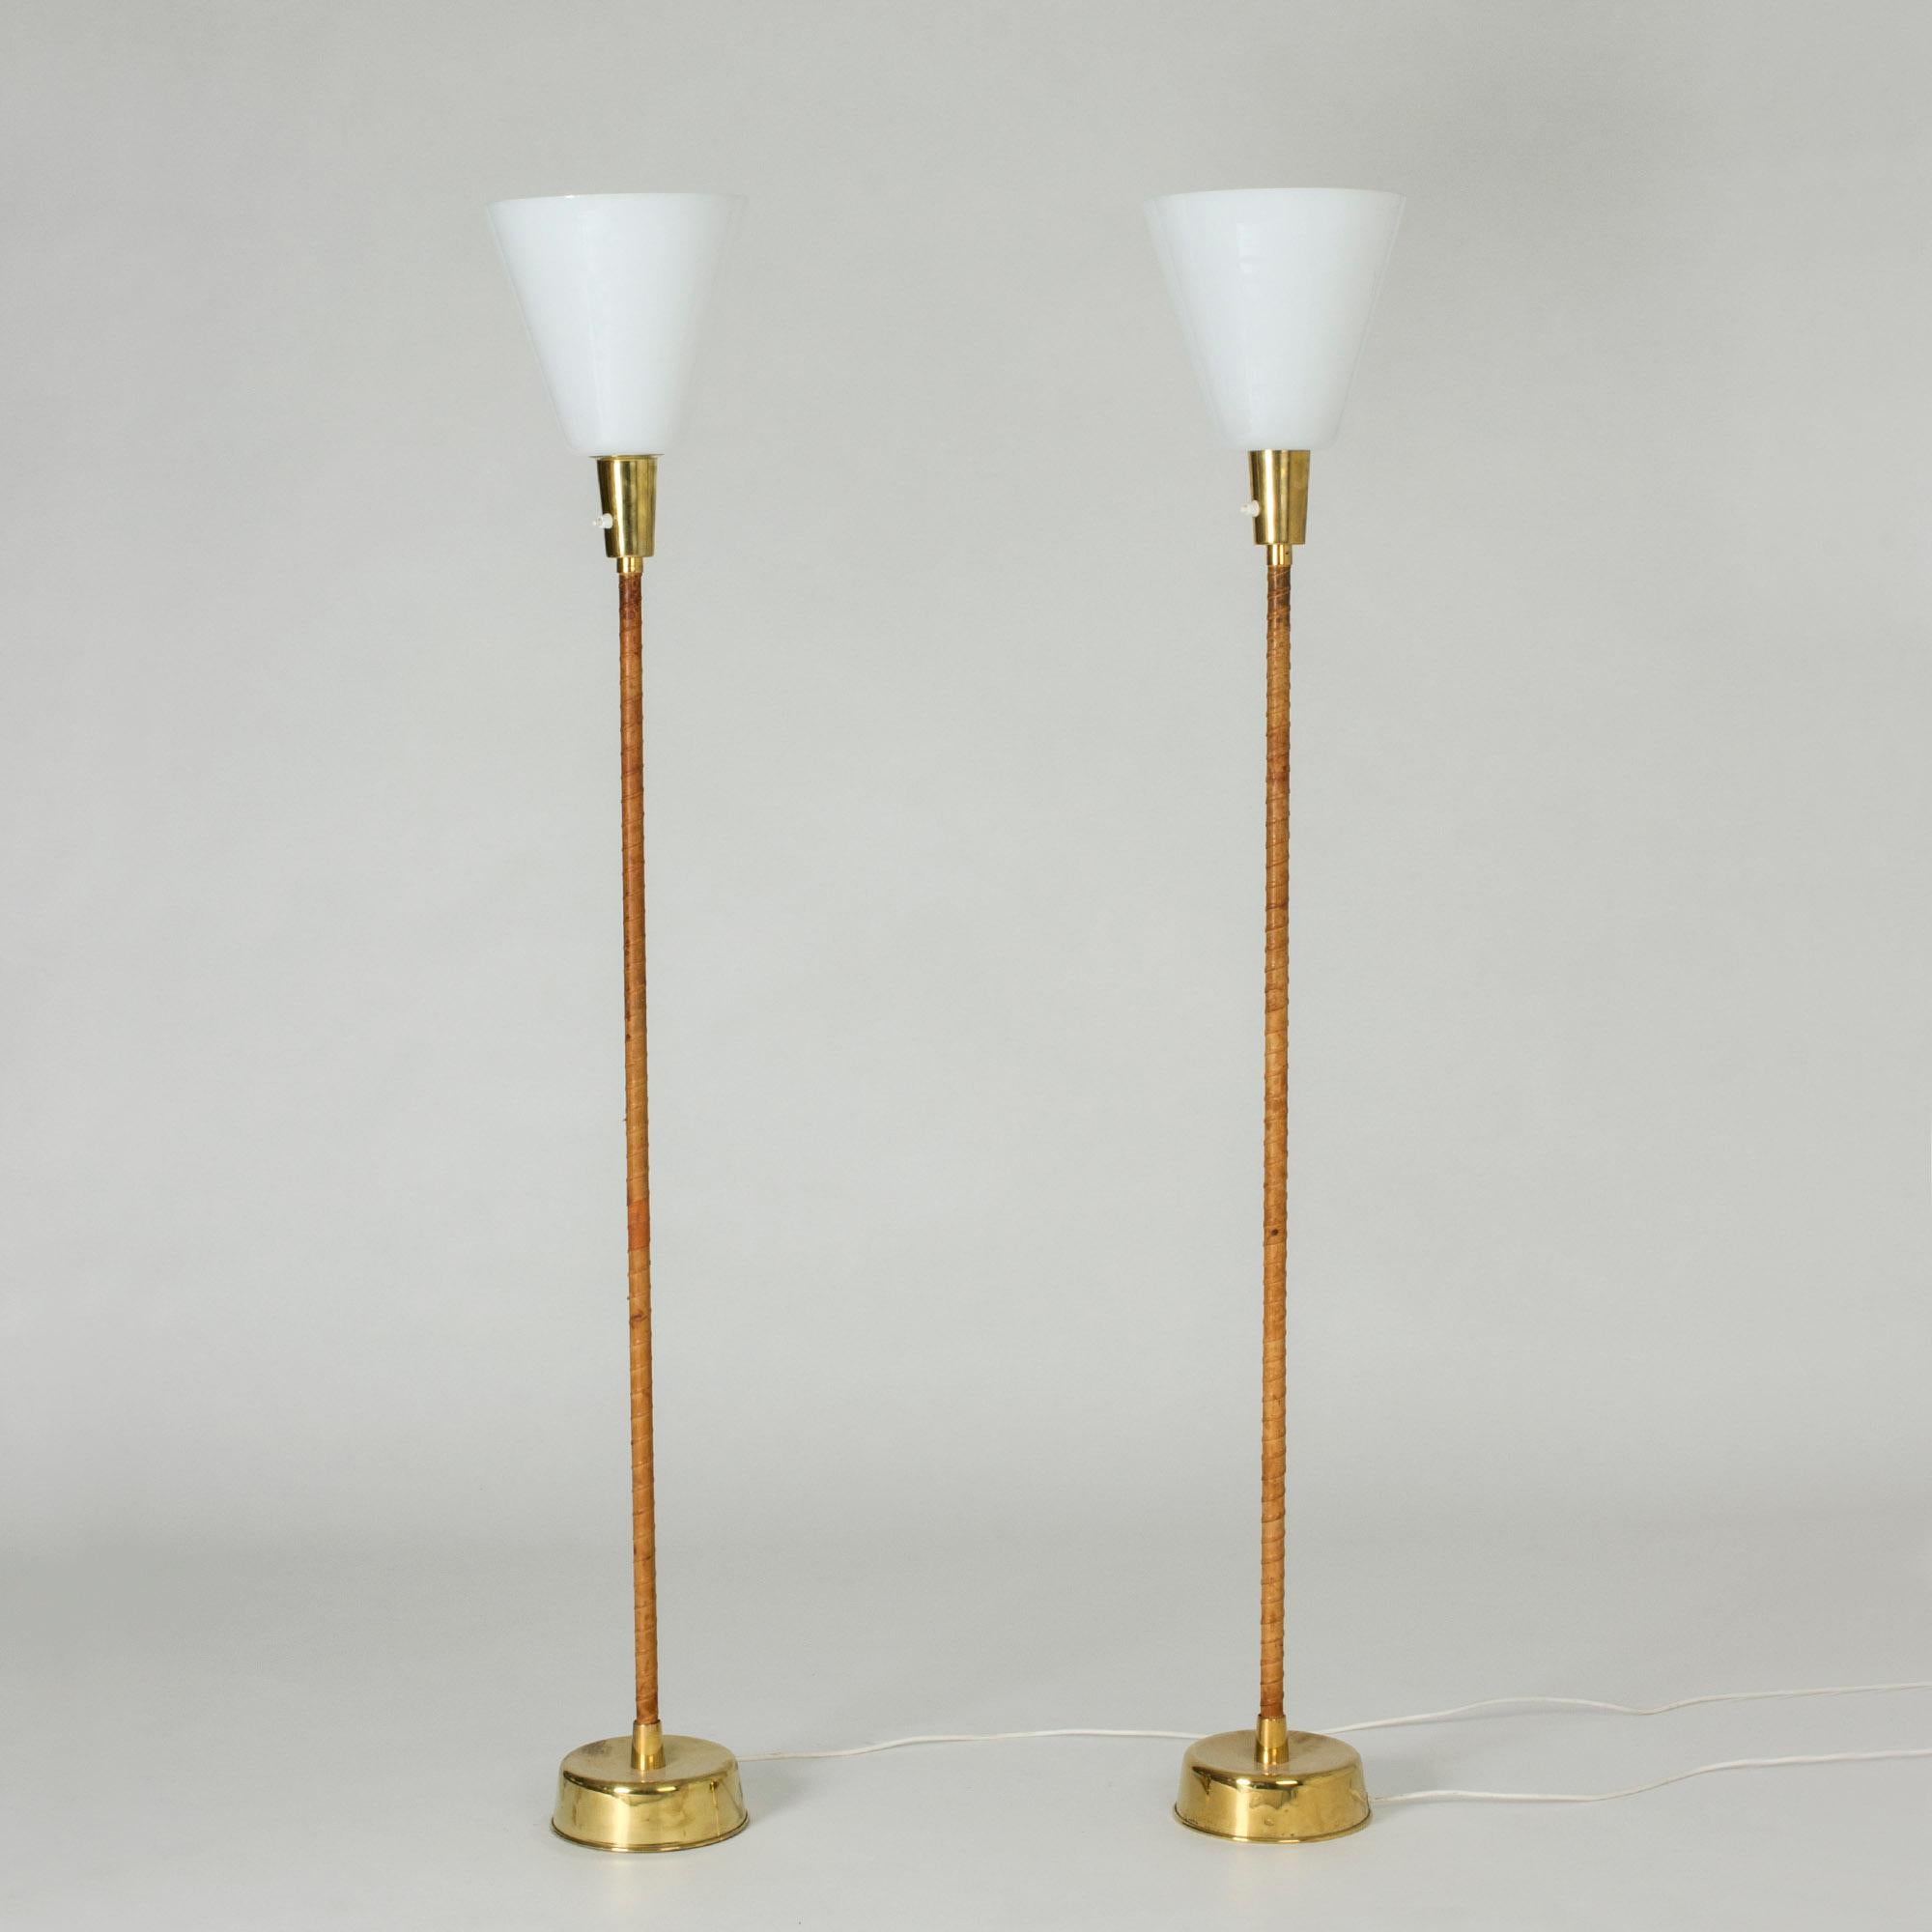 Pair of floor lamps by Lisa Johansson-Pape, striking in their poised simplicity. Brass bases and brown leather wound handles, voluminous white lamp shades. Shades can easily be lifted off to make the lamps into uplights with glass shades.